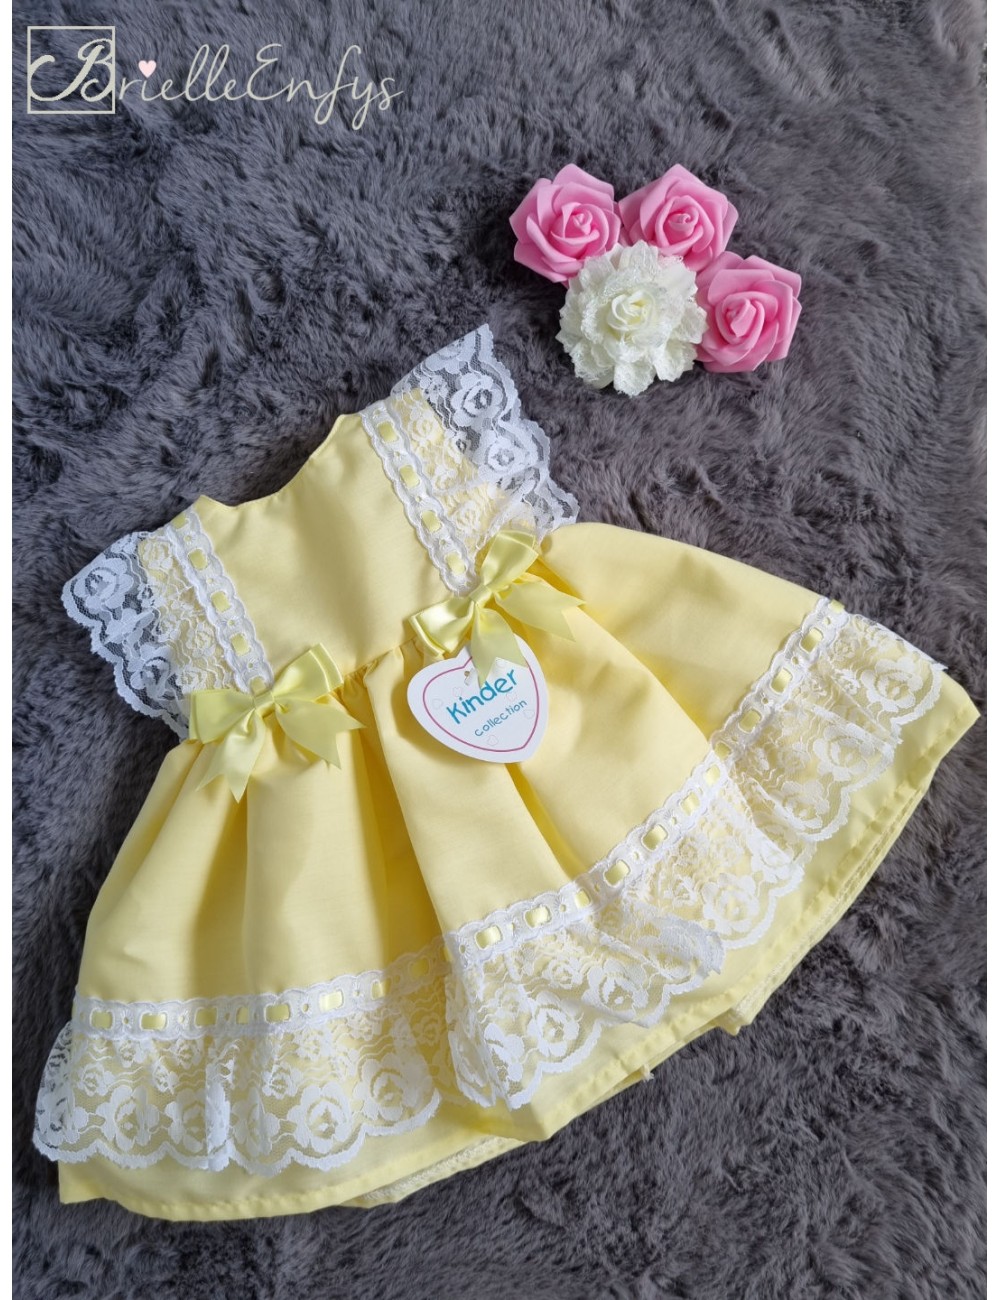 https://www.brielleenfys.co.uk/191-large_default/kinder-collection-frilly-lace-dress-with-matching-satin-bows-3-18-months.jpg